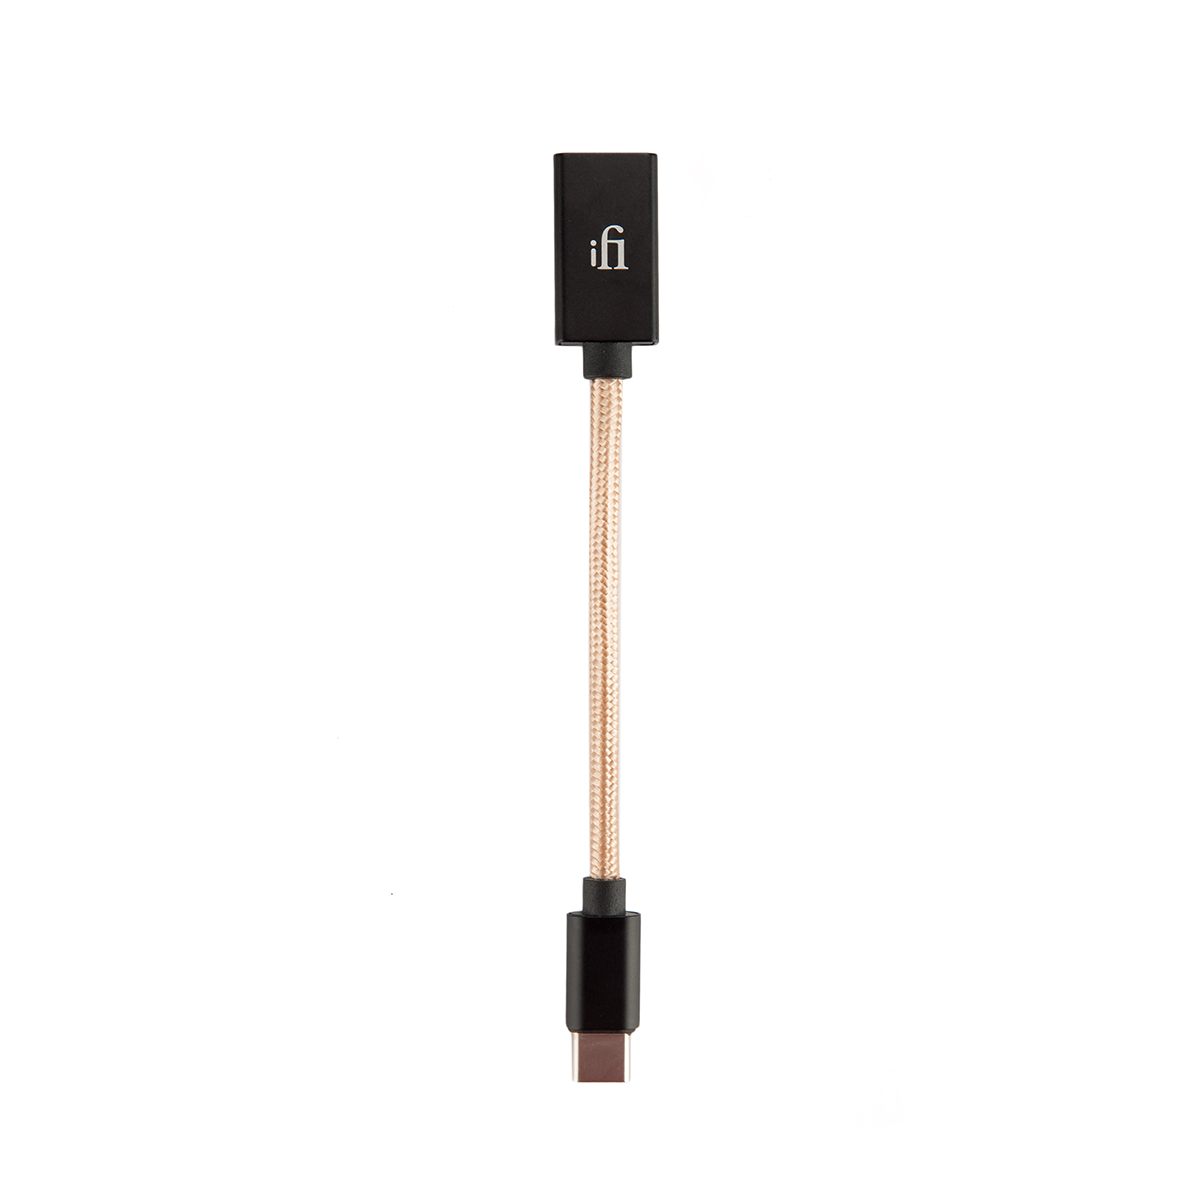 iFi USB Female On-The-Go (OTG) Audiophile Adapter Cable